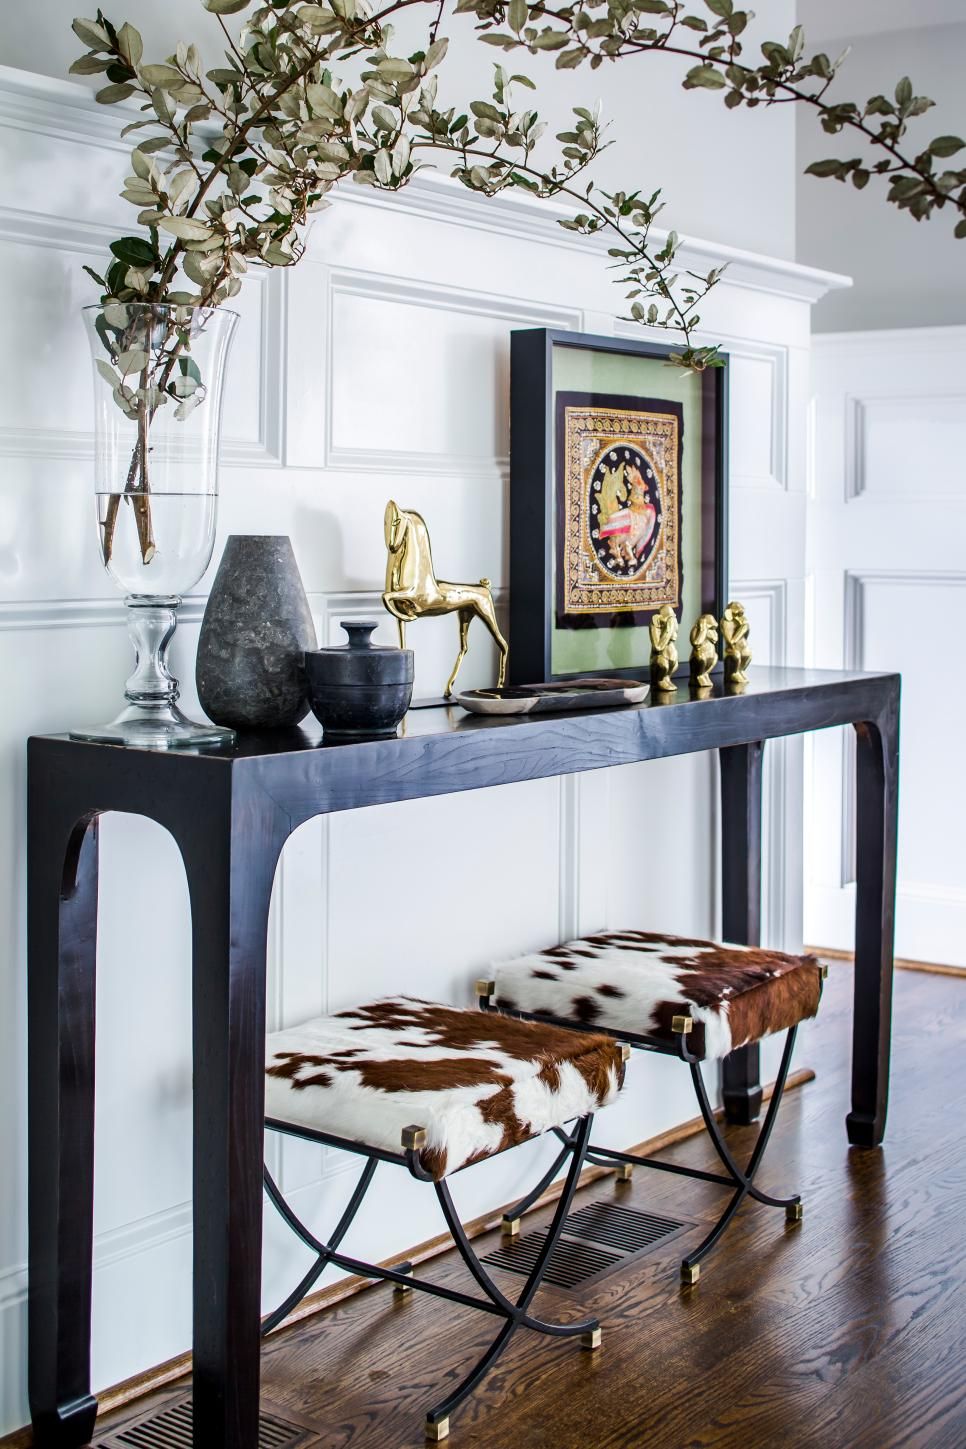 Eclectic Foyer With Chic Black Console Table | Hgtv With Regard To Caviar Black Console Tables (View 16 of 20)